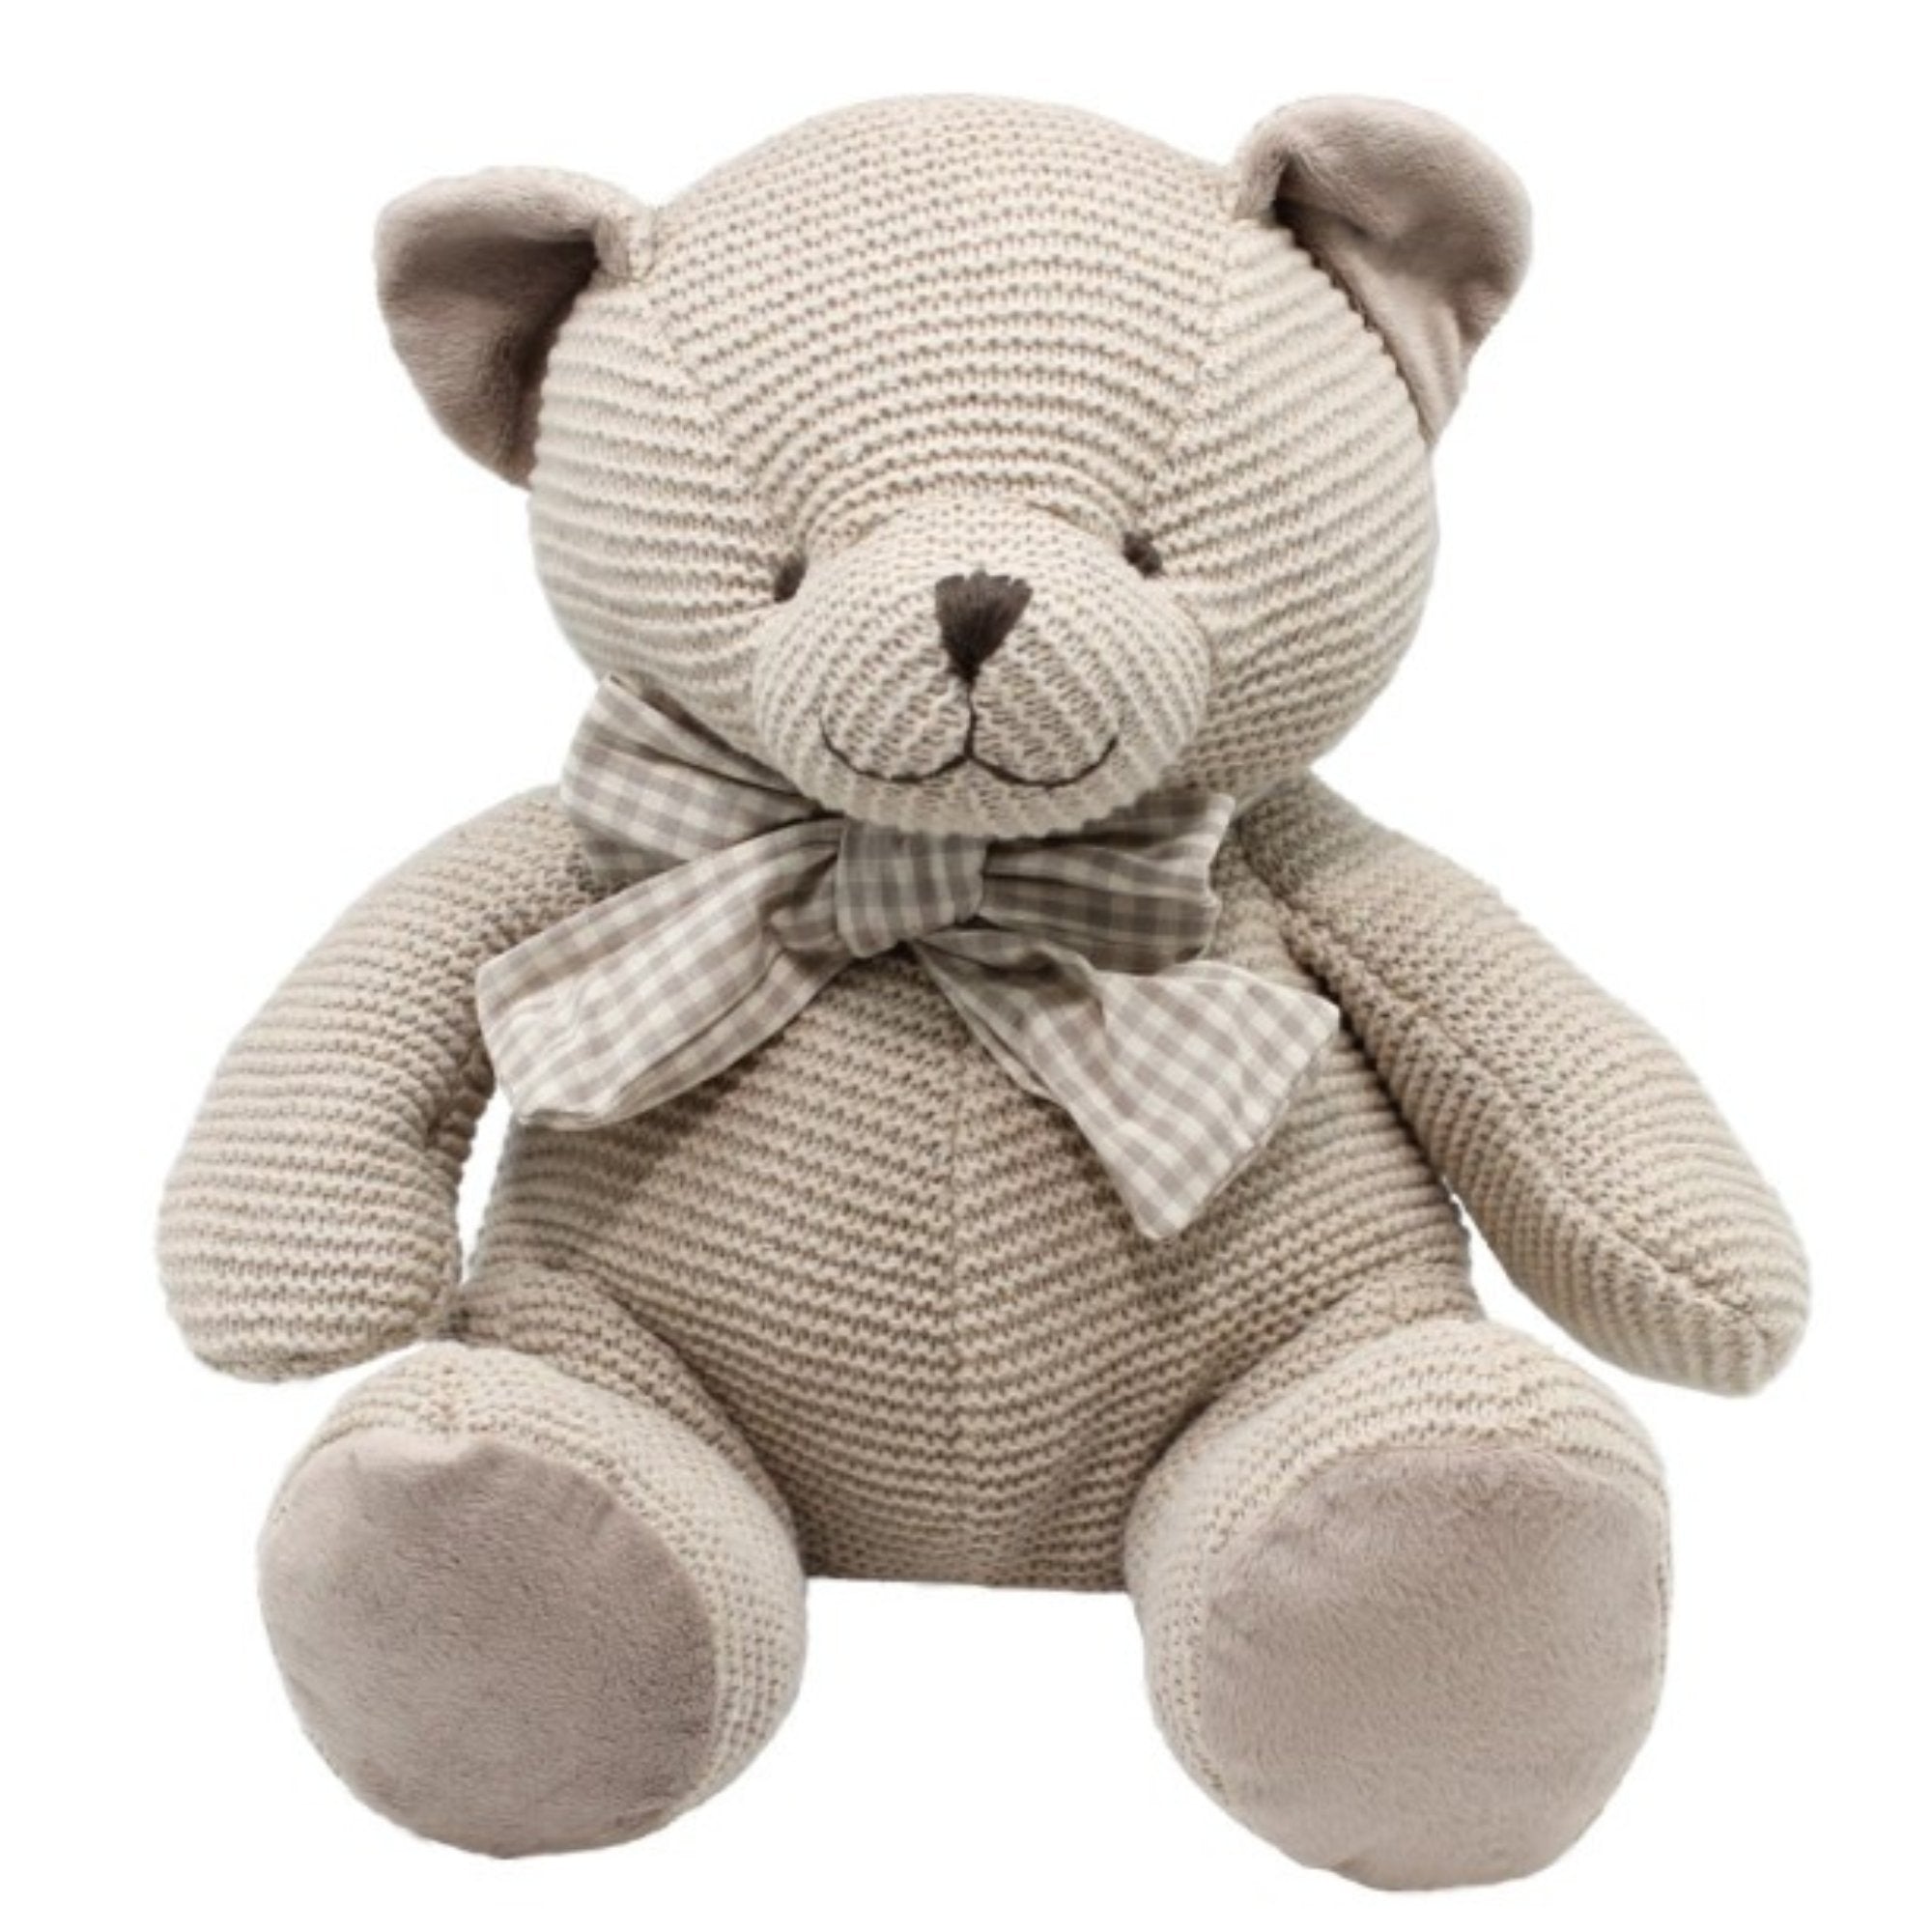 Large Knitted Teddy - Beautiful Gifts